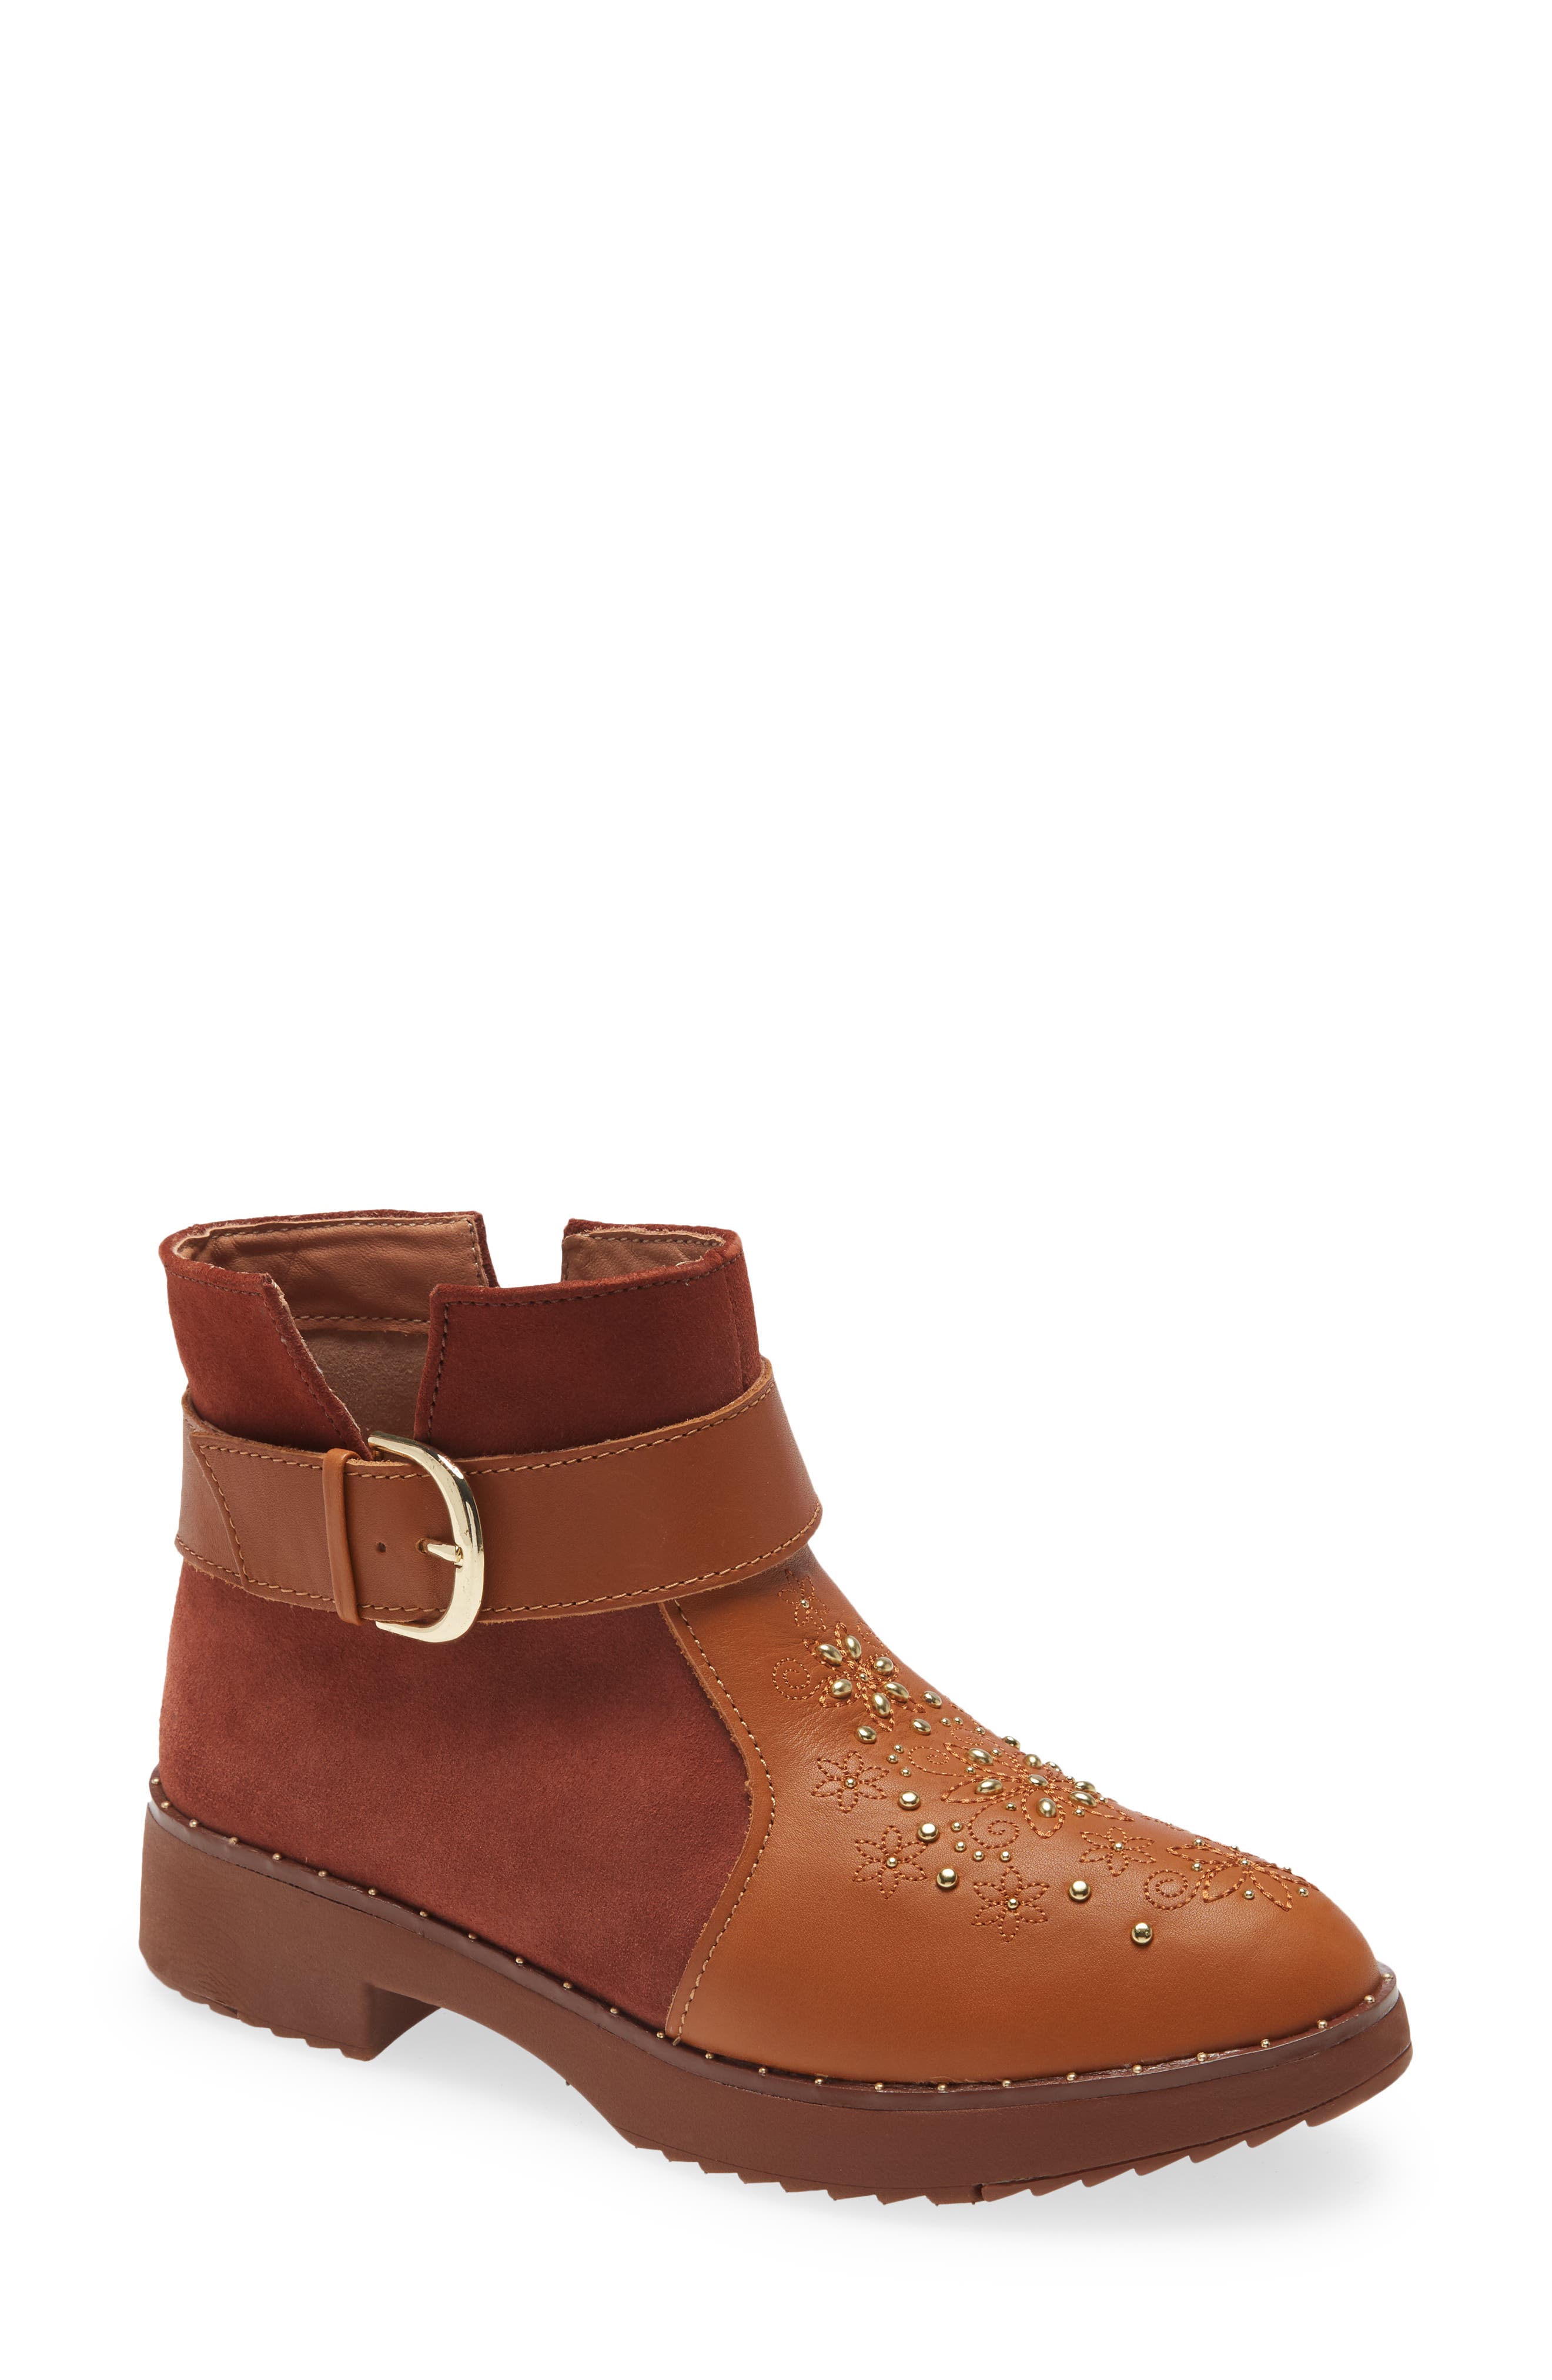 Fitflop Athena Flower Stud Ankle Boot In Light Tan